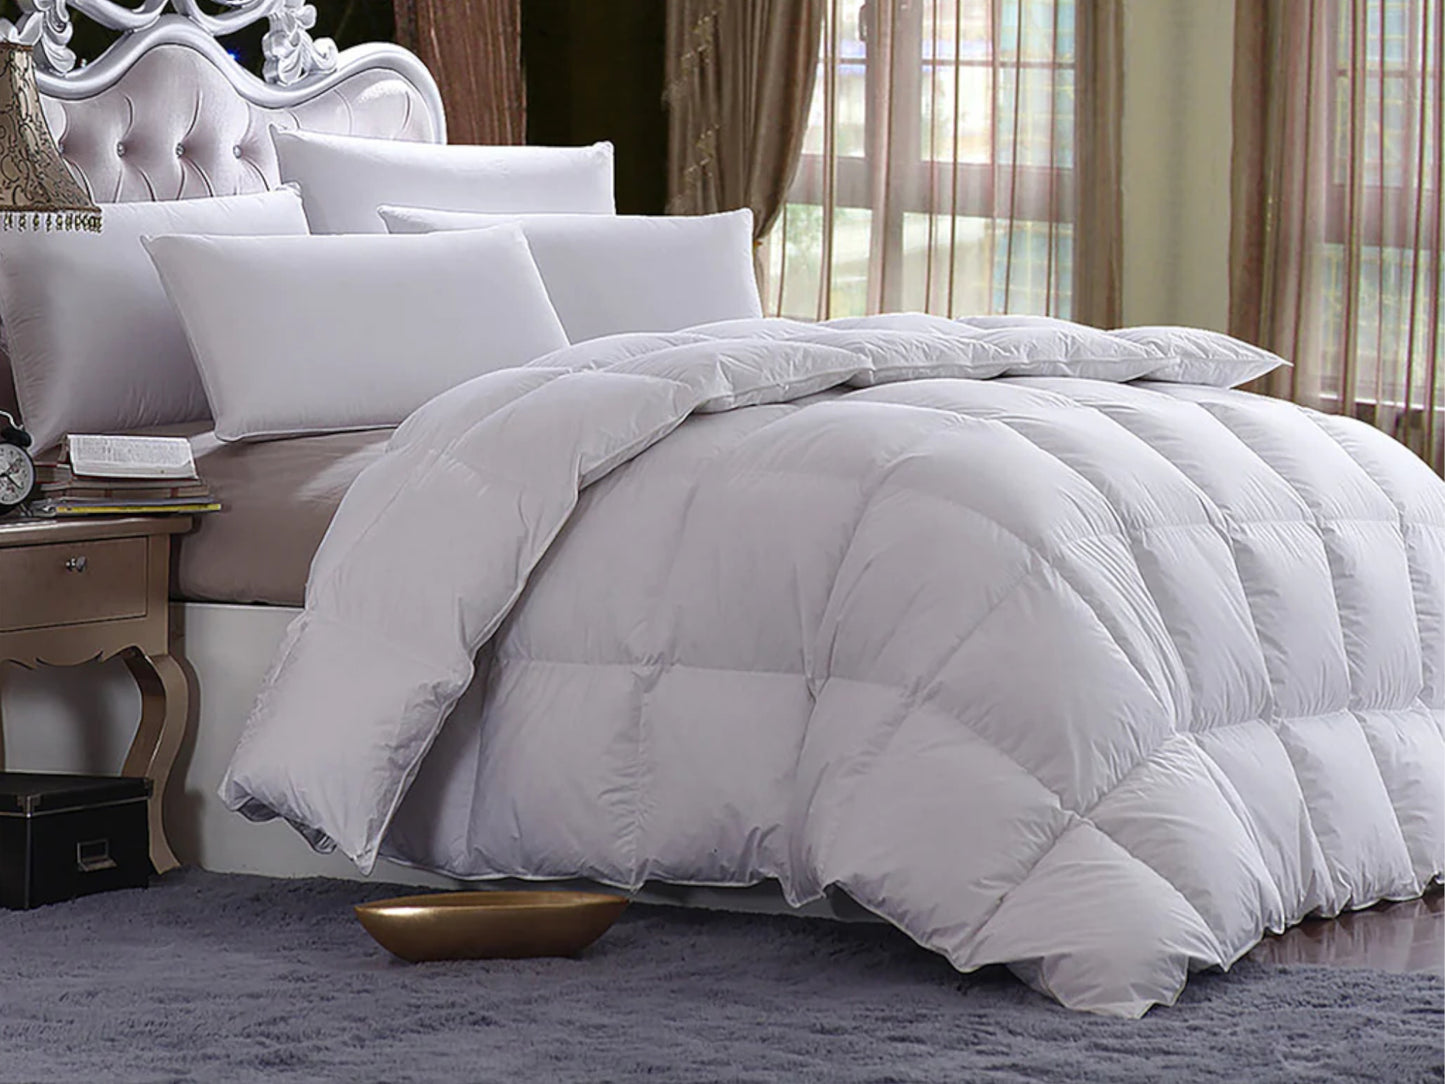 Luxury Goose Feather & Down Natural Duvet 13.5 and 10.5 Tog